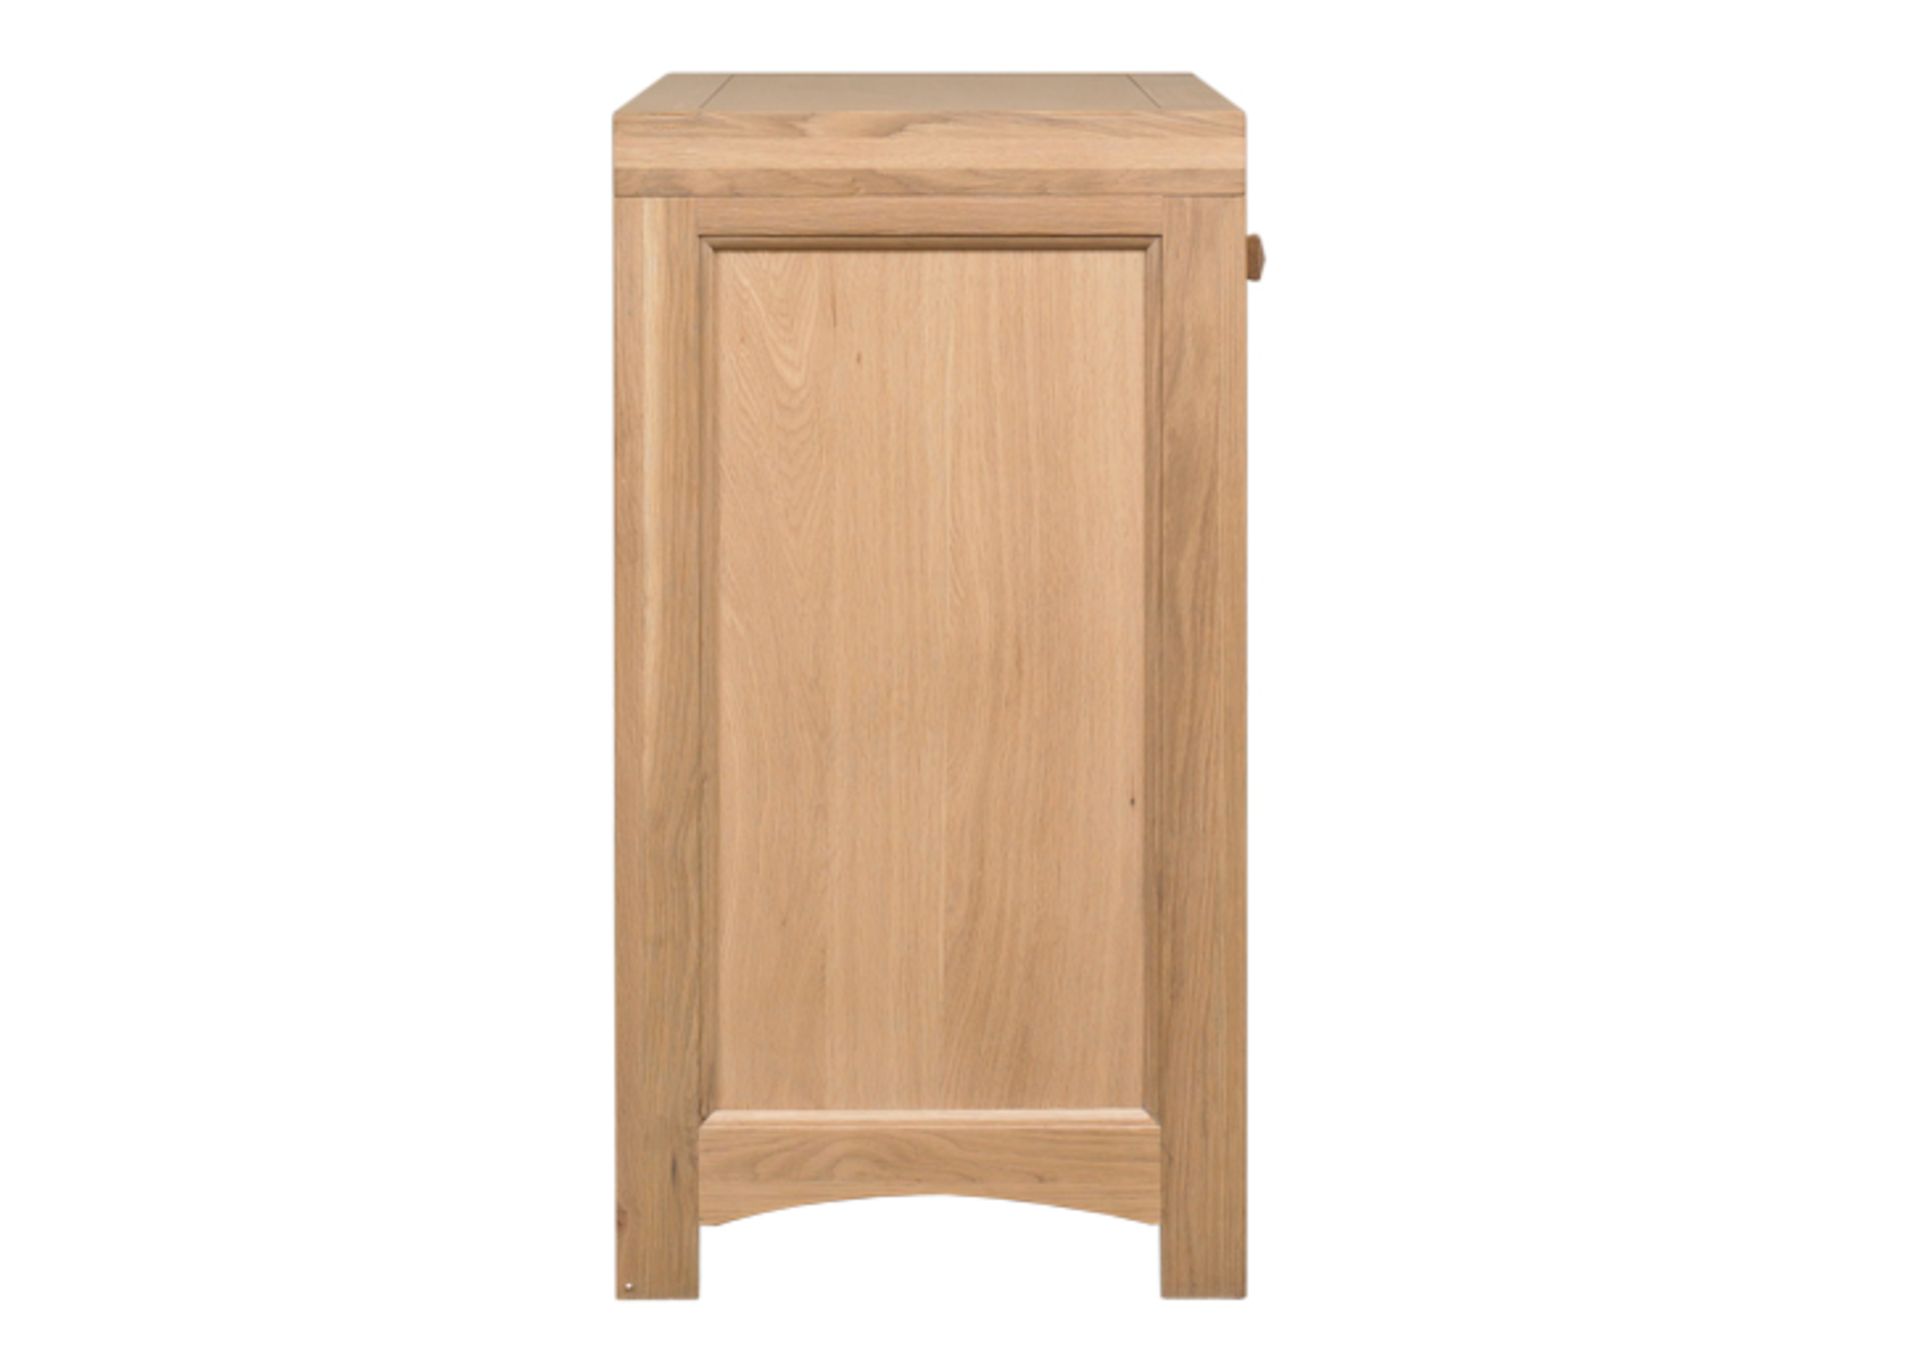 1 x Mark Webster Buckingham Small Sideboad - Two Door/Two Drawer - White Wash Oak With a Timeless - Image 2 of 3